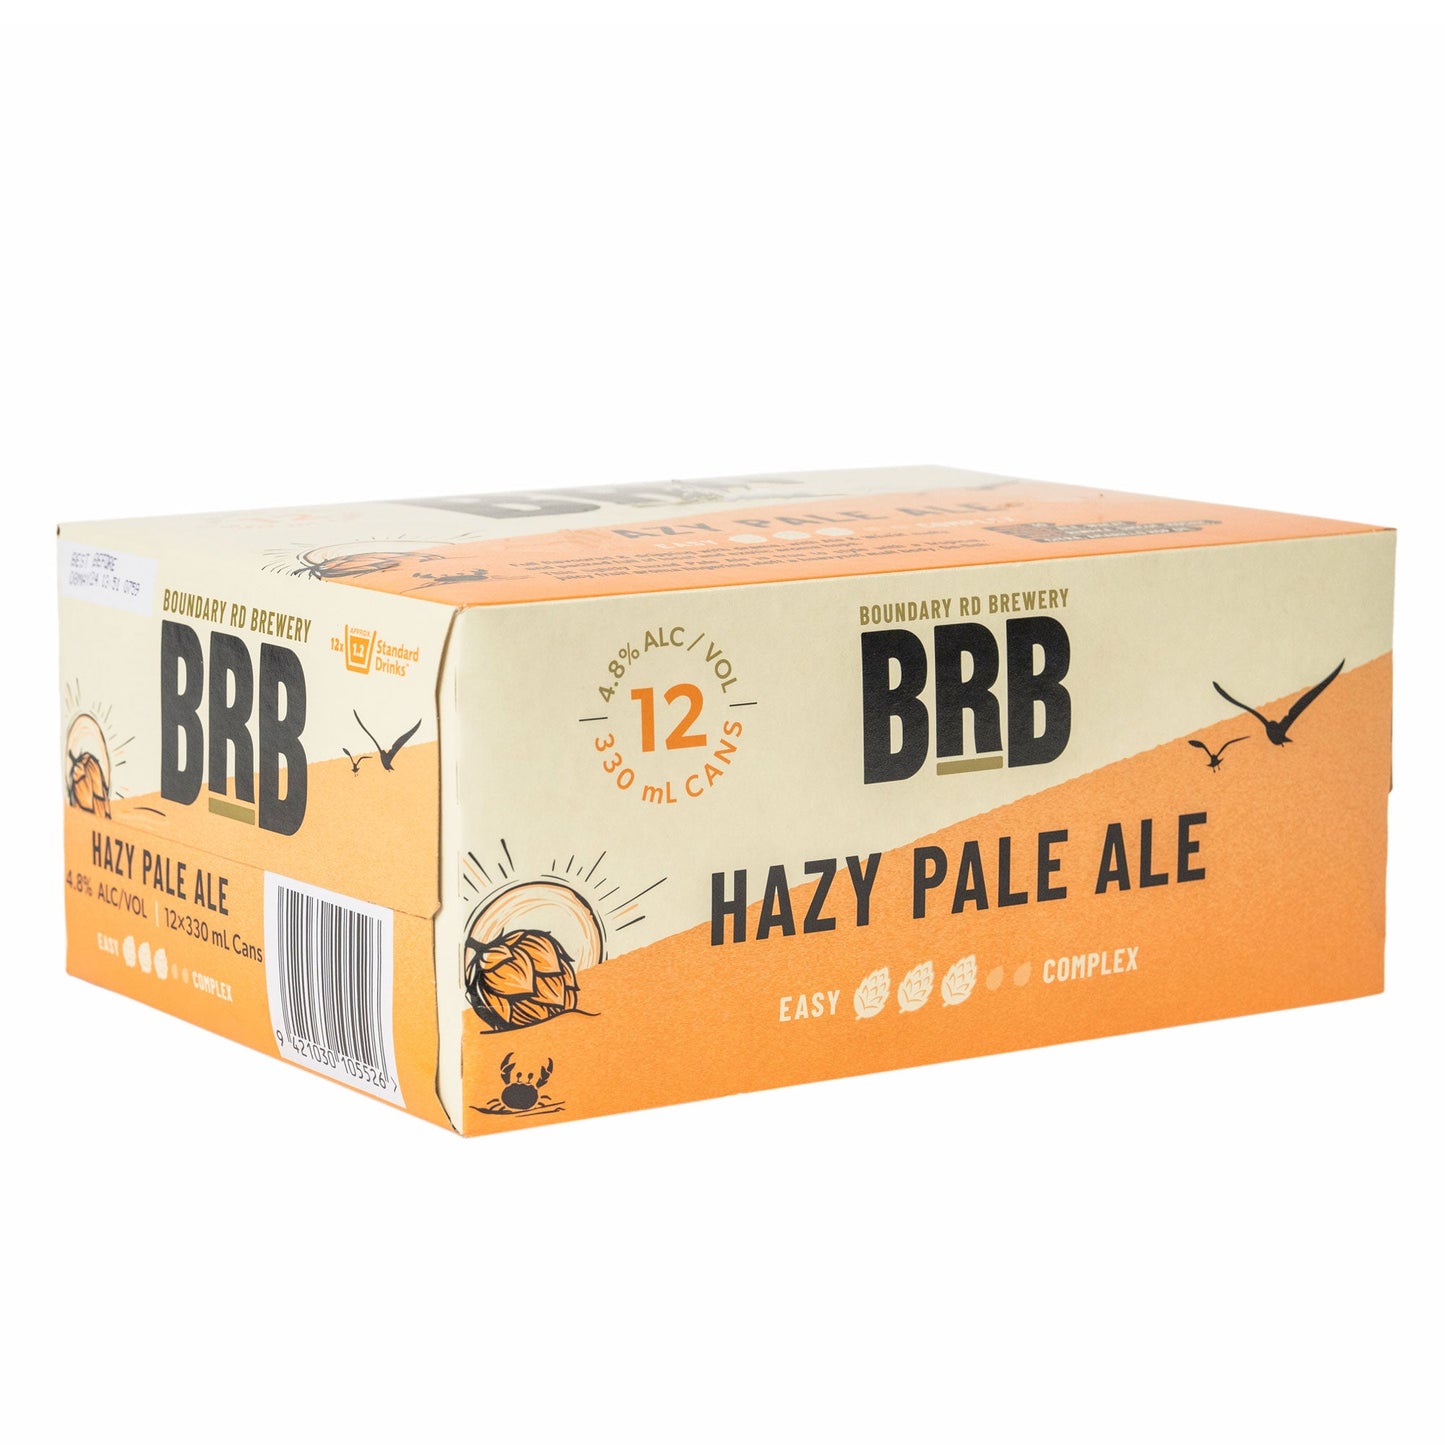 Boundary Road Brewery Hazy Pale Ale Cans 12x330ml